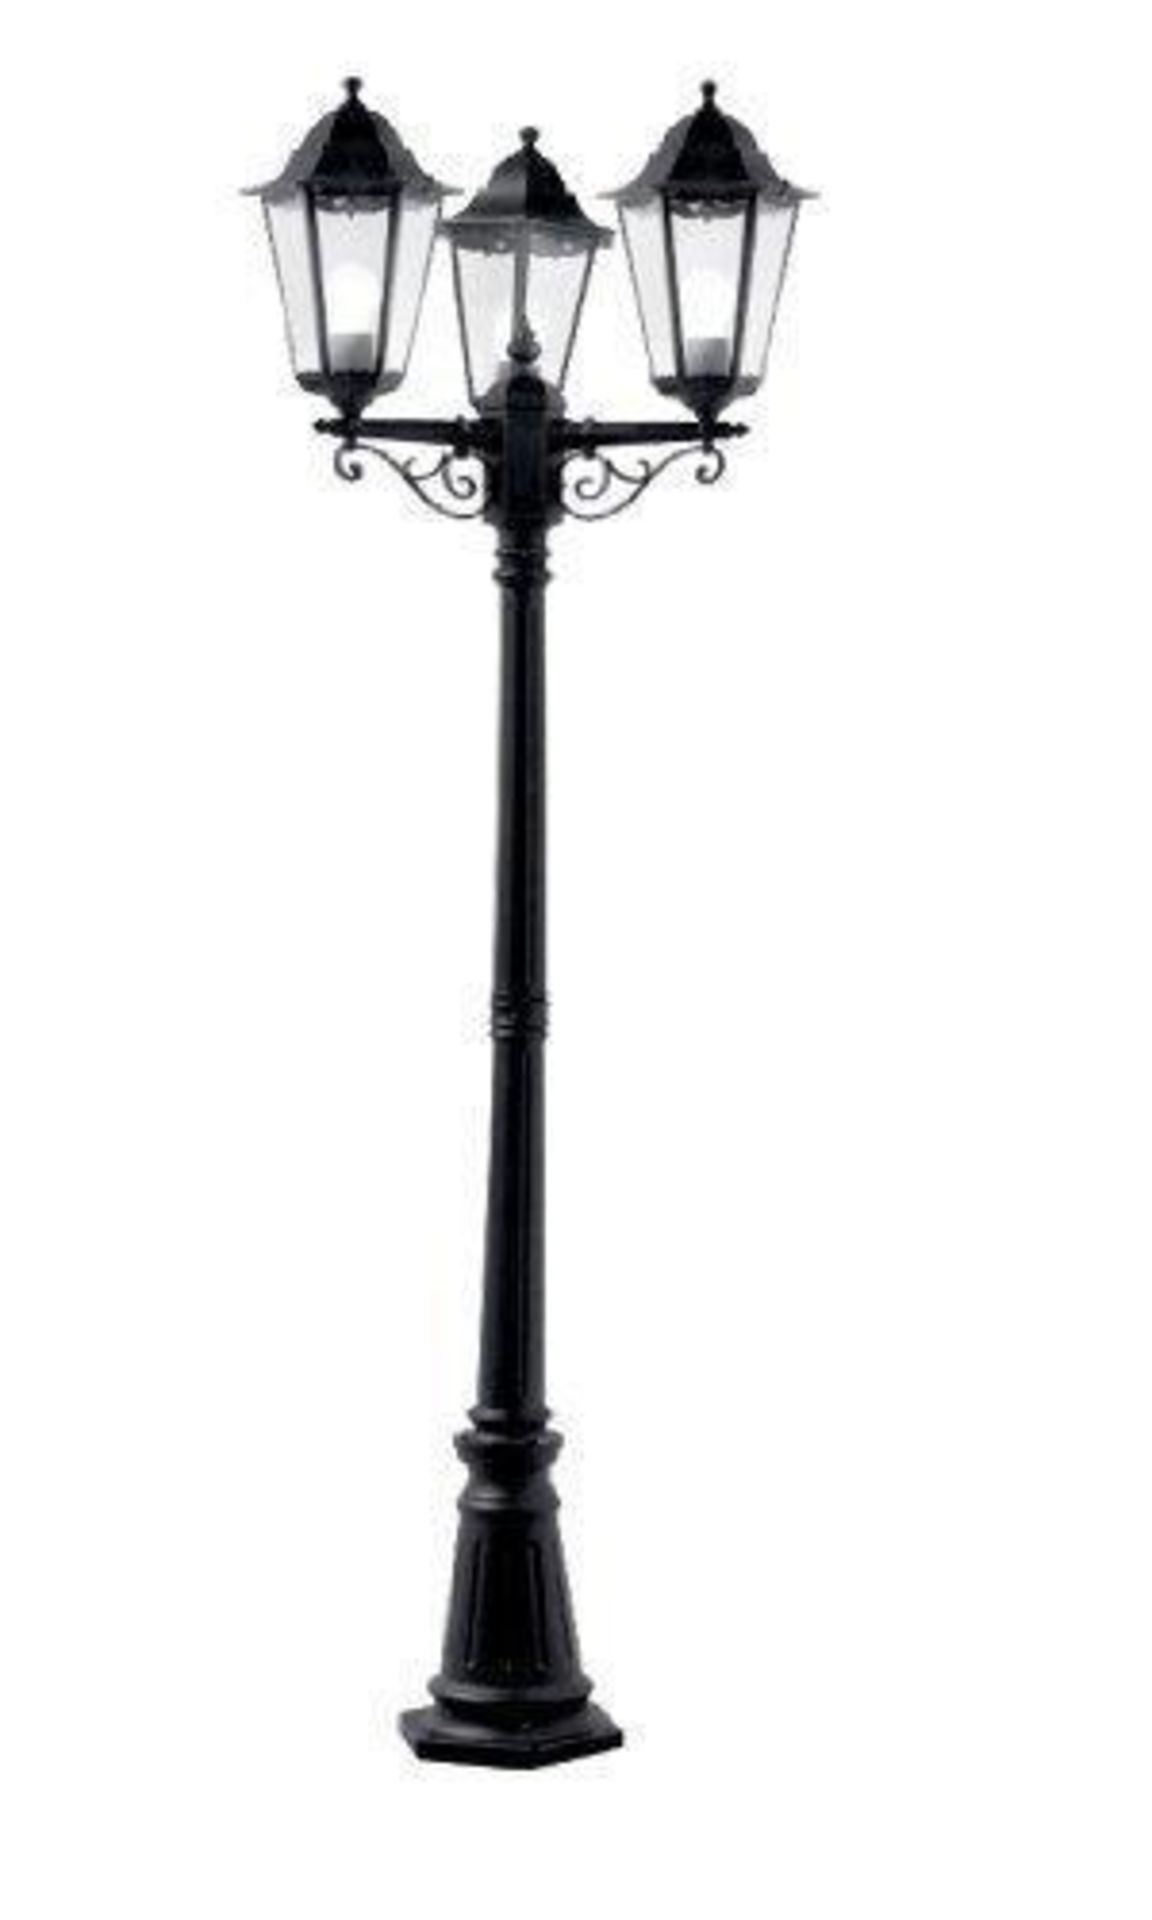 Mayfair 3 Way Black Outdoor Ground Post Light - ER47. This vintage style, triple head, outdoor